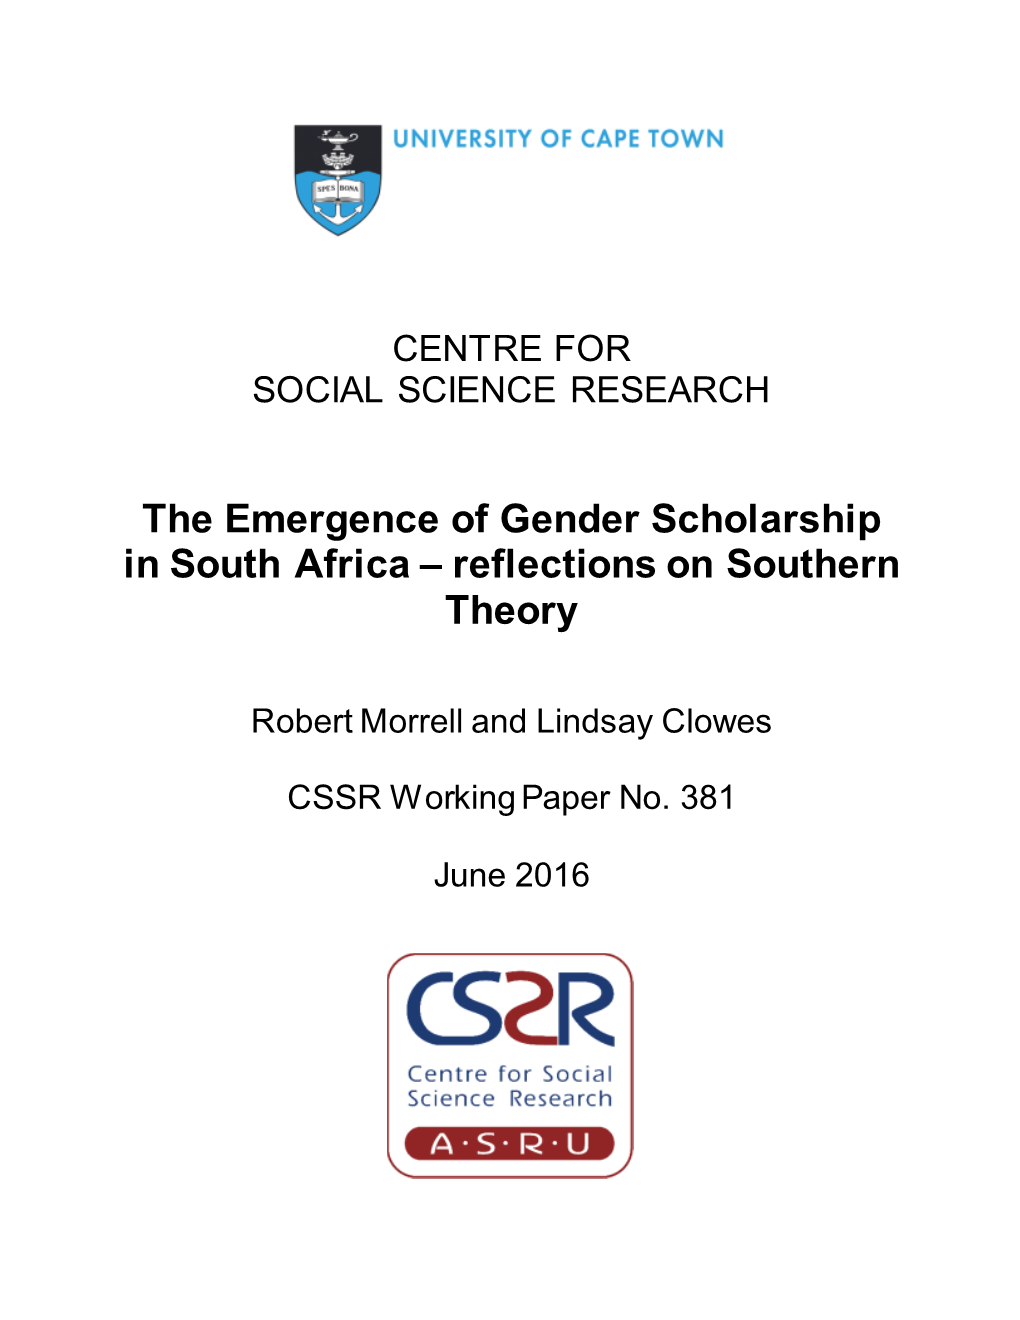 The Emergence of Gender Scholarship in South Africa – Reflections on Southern Theory